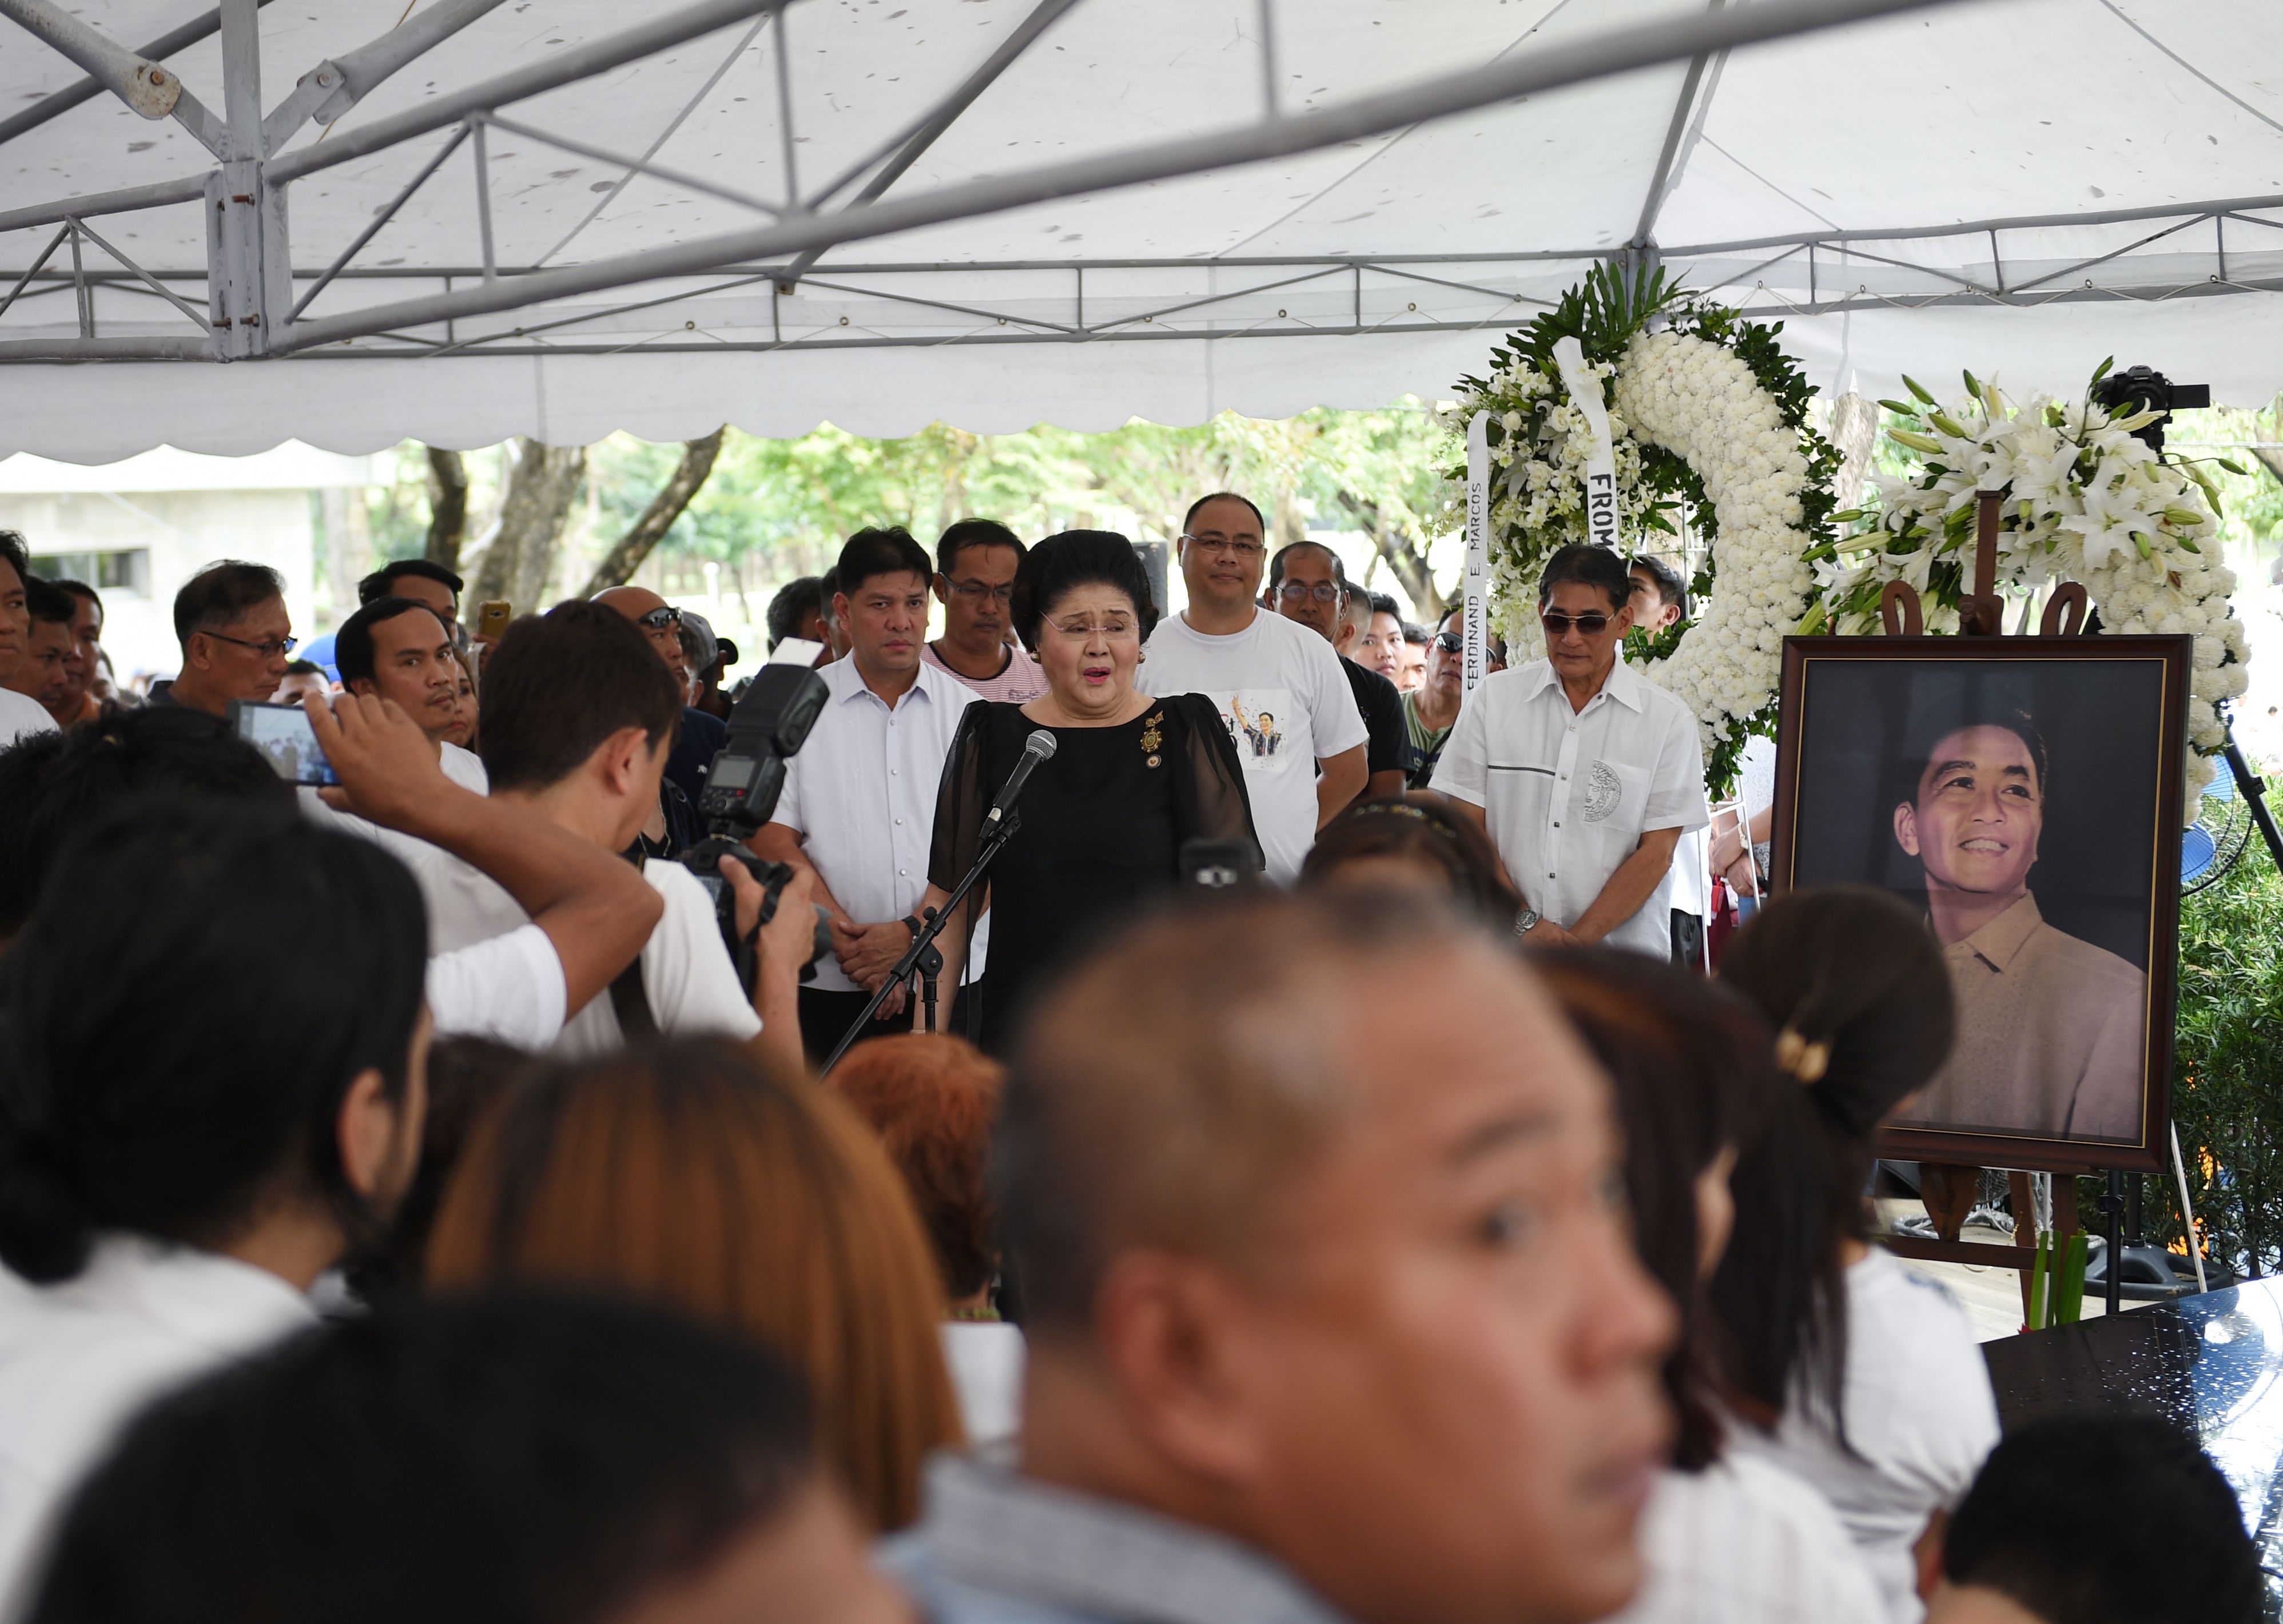 Philippines' former First Lady Imelda Marcos, center, speaks to supporters at the graveyard of the late dictator Ferdinand Marcos at the Heroes' Cemetery in Manila on Nov. 19, 2016, a day after the late dictator was buried. (Ted Aljibe—AFP/Getty Images)